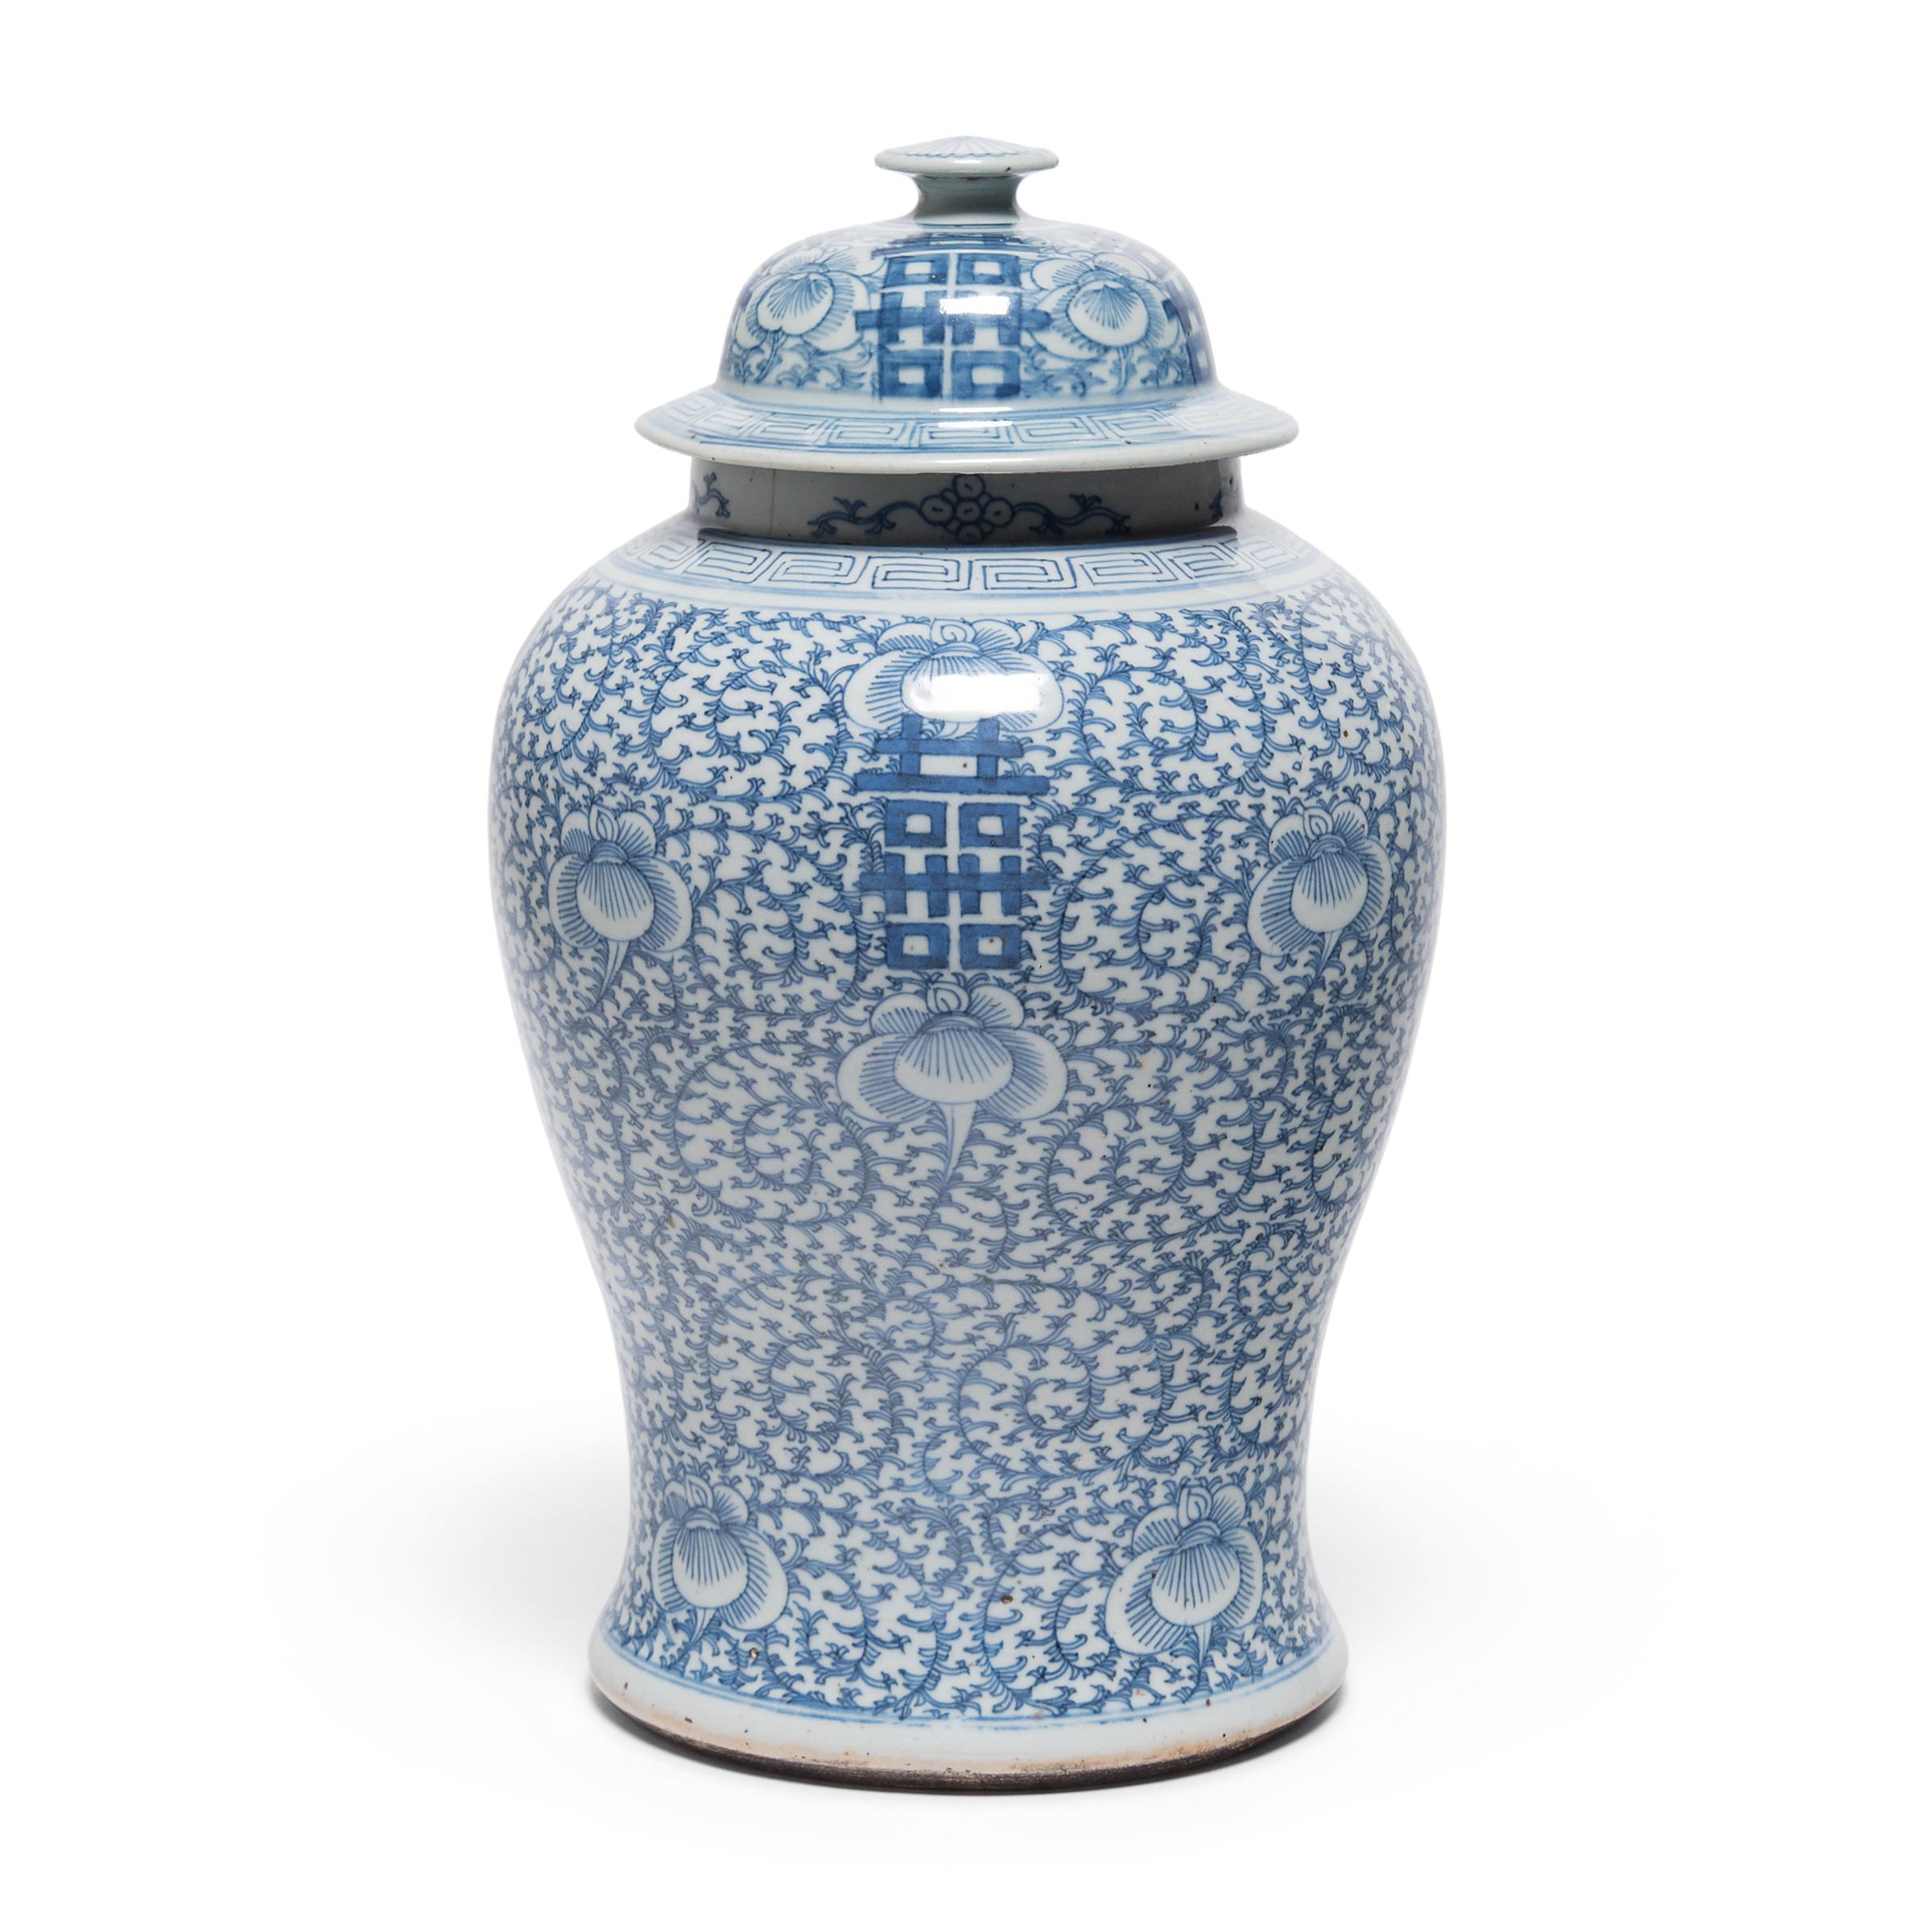 First developed during the Tang dynasty, Chinese blue-and-white porcelain has been treasured by collectors for centuries. Renowned for its painterly decoration and the beautiful contrast of rich blue on white, this unique ceramic style begins with a